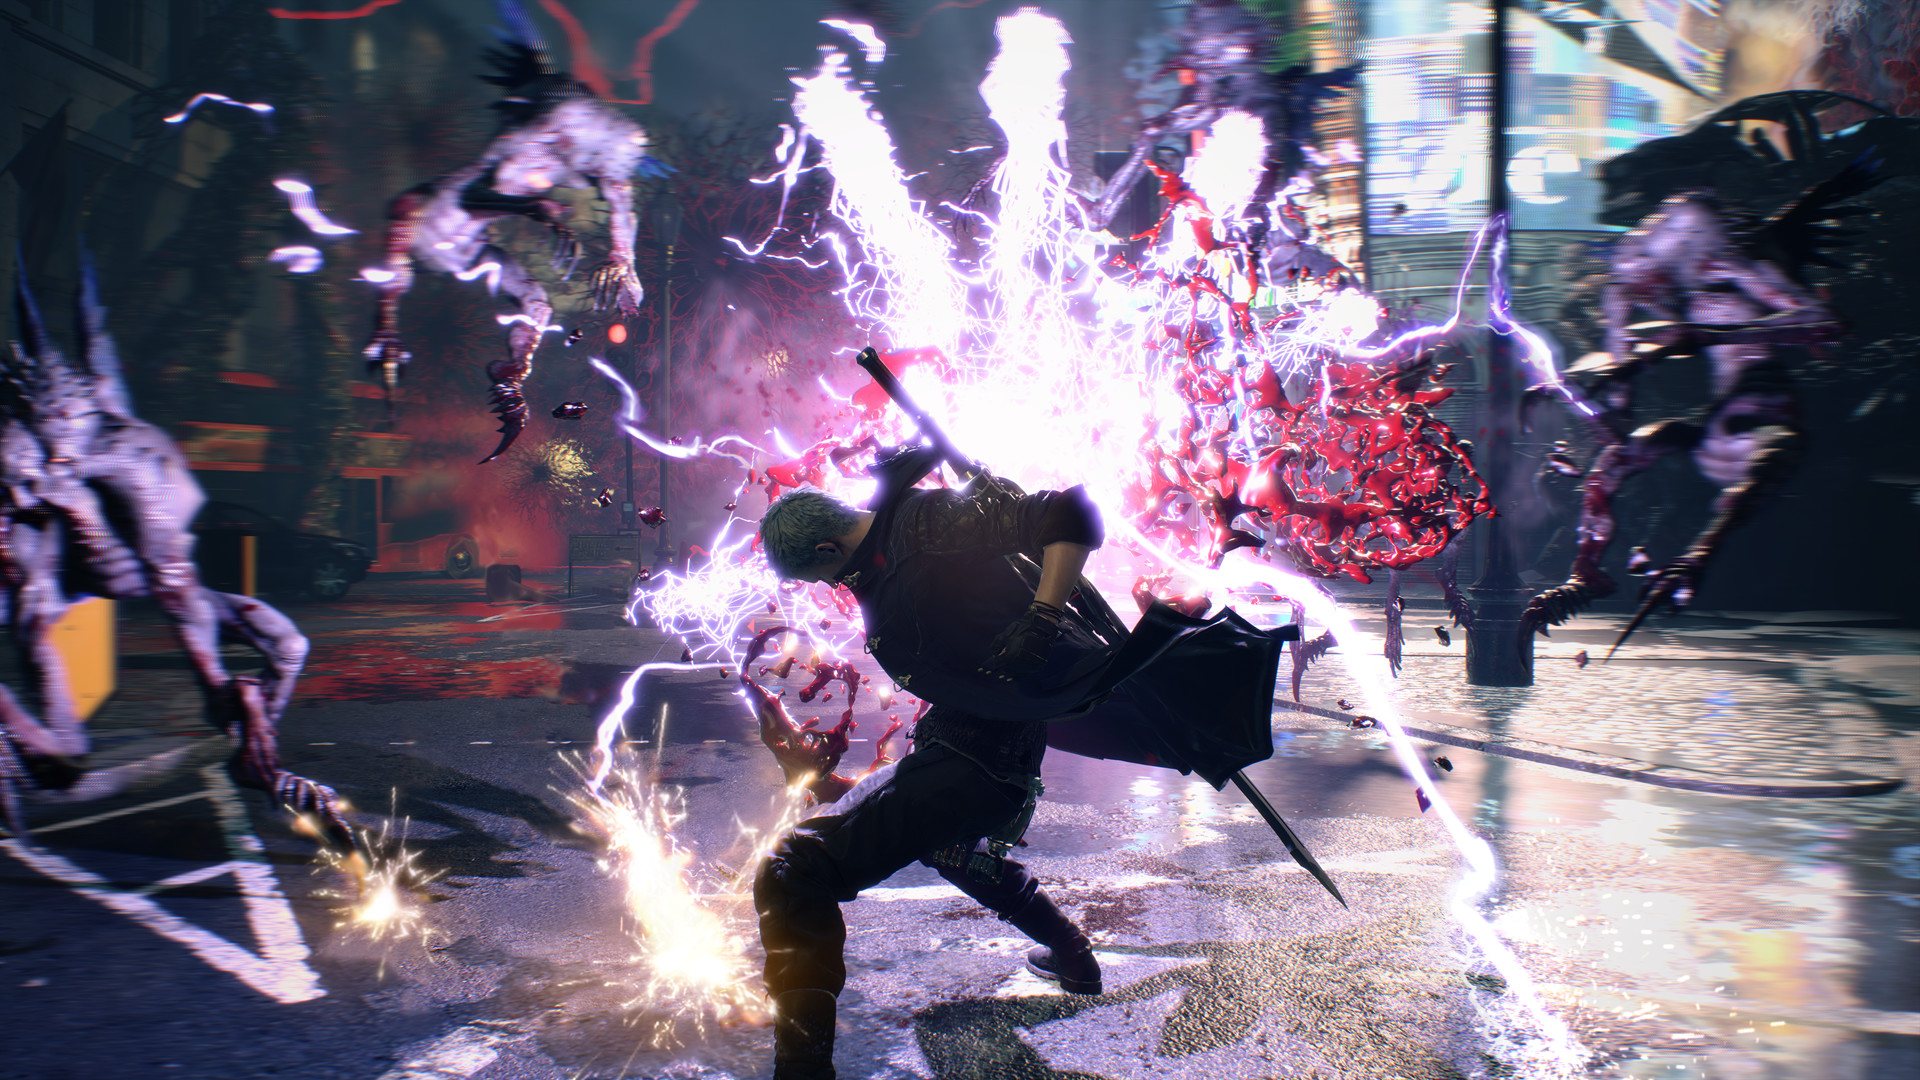 Devil May Cry 5 - Deluxe Upgrade Steam CD Key 13.75 $